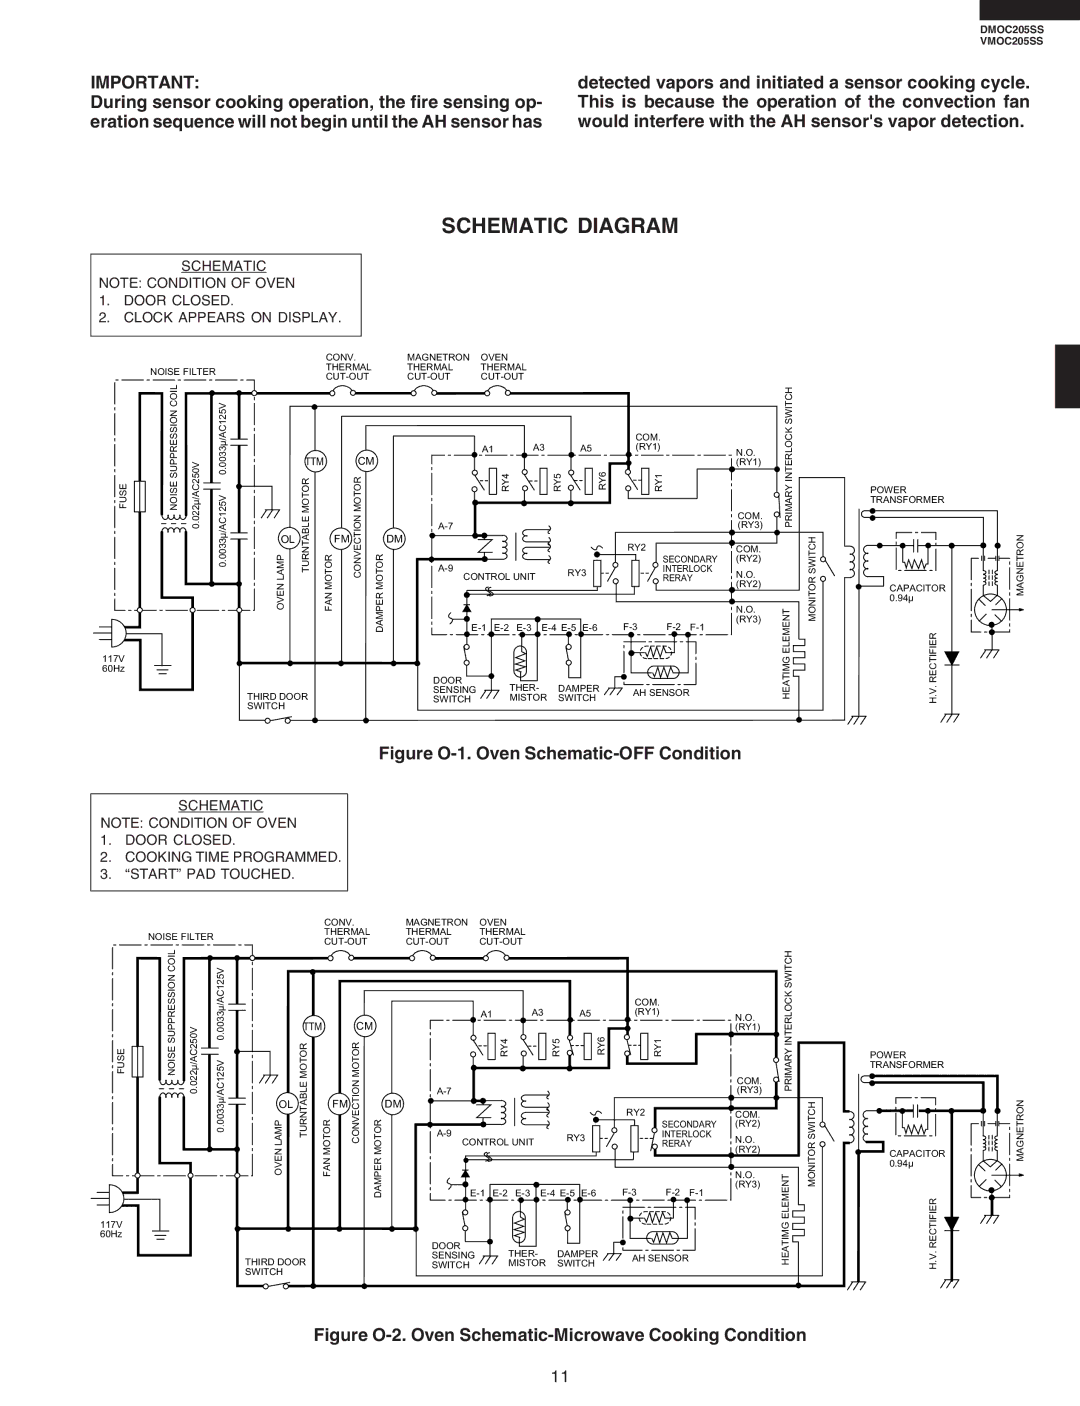 Viking DMOC205SS, VMOC205SS service manual Schematic Diagram, Figure O-1. Oven Schematic-OFF Condition 